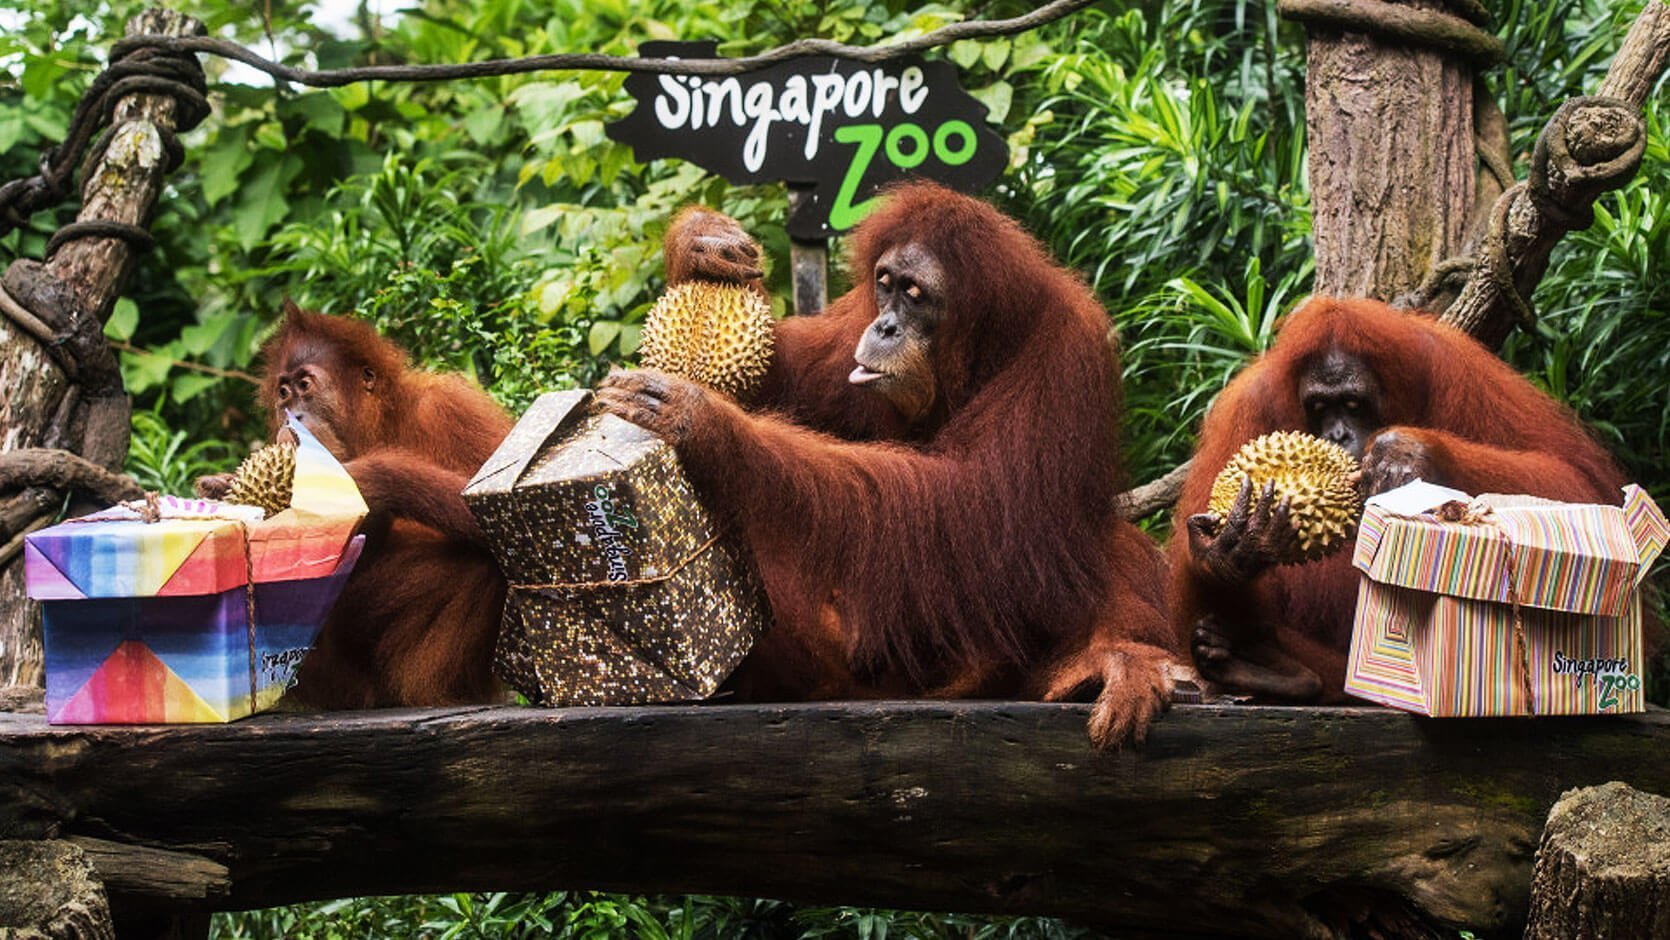 Singapore Zoo (SIGNALGRYD Wireless Paging Systems)